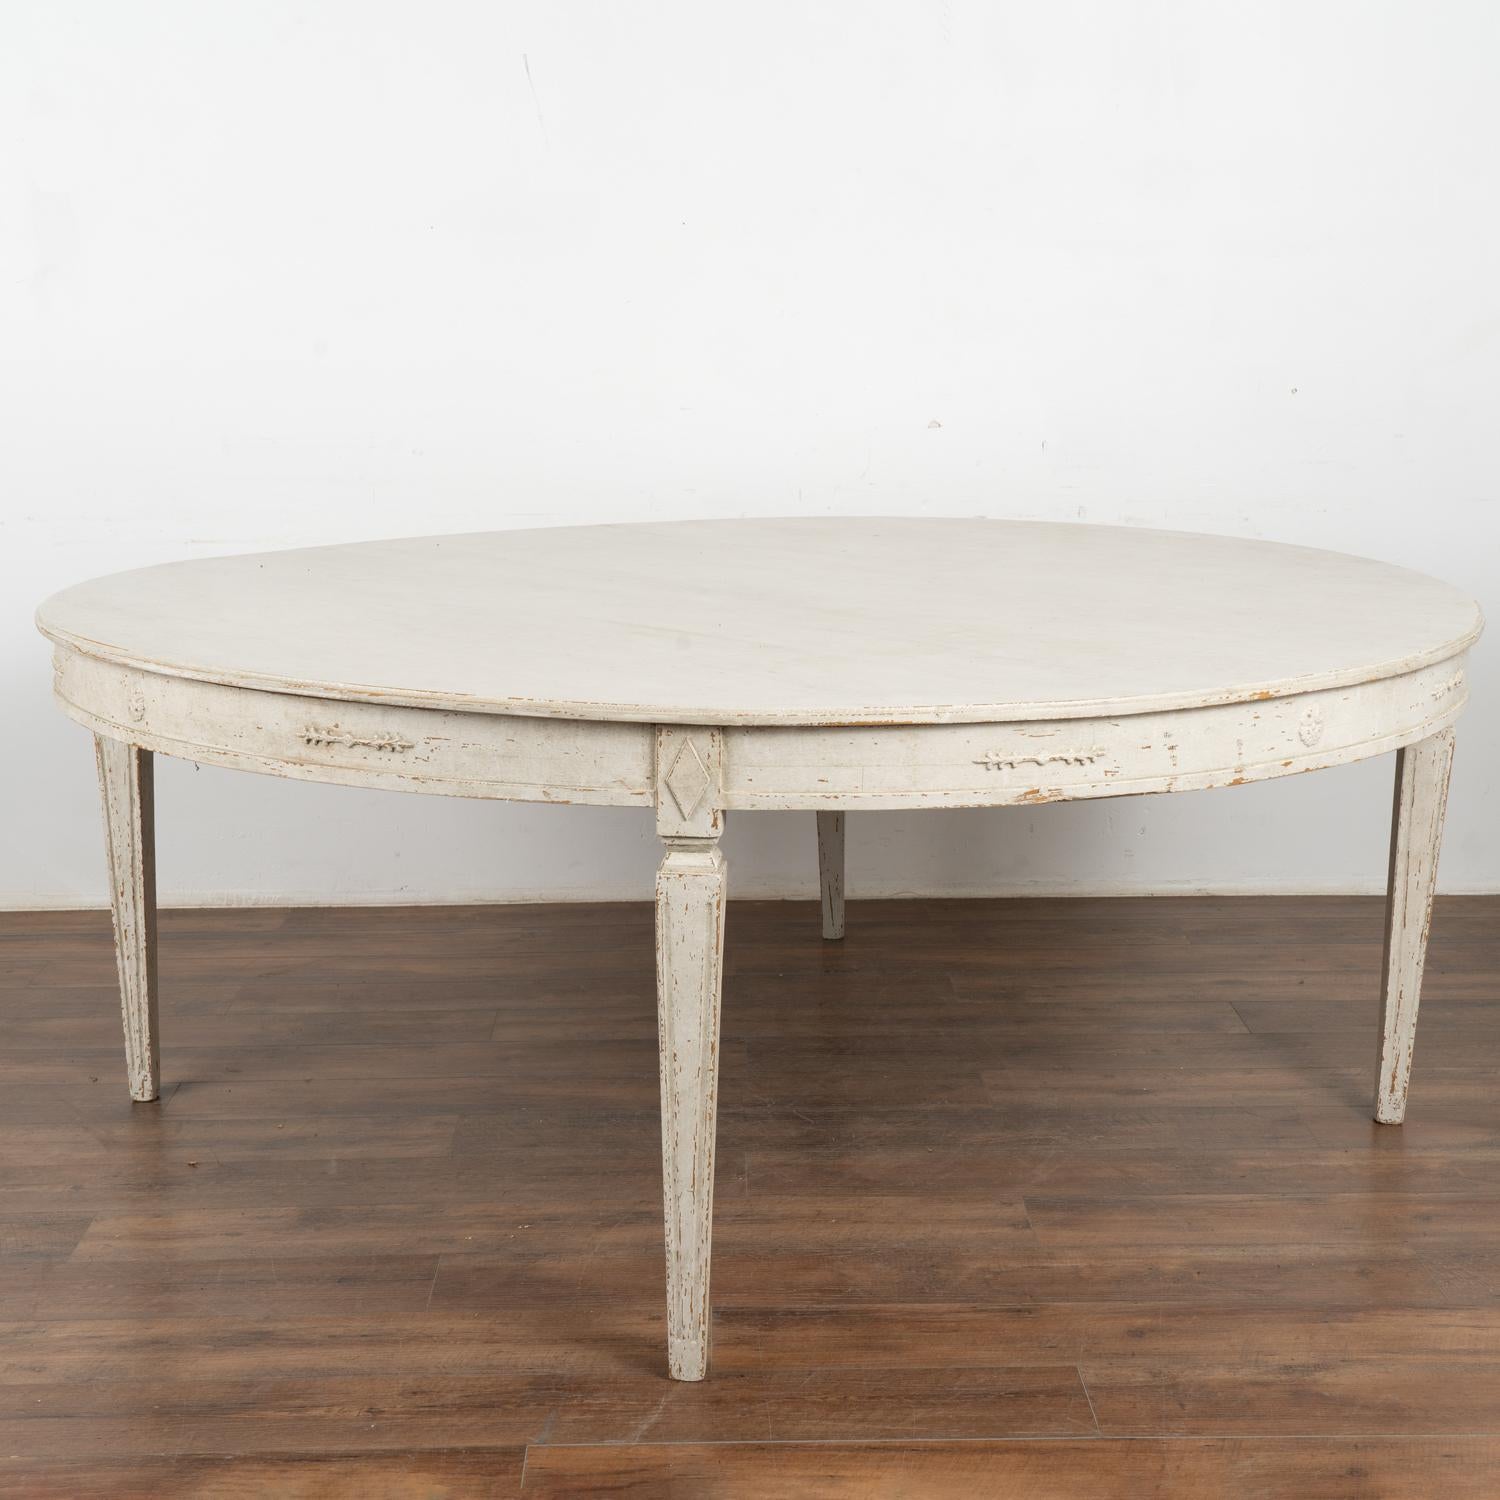 Round dining table, 6.5' diameter with the look of the Gustavian style.
This size table did not exist in the gustavian period; this new table mirrors the Swedish style in a larger size suited for today's modern home.
Lovely tapered fluted legs,